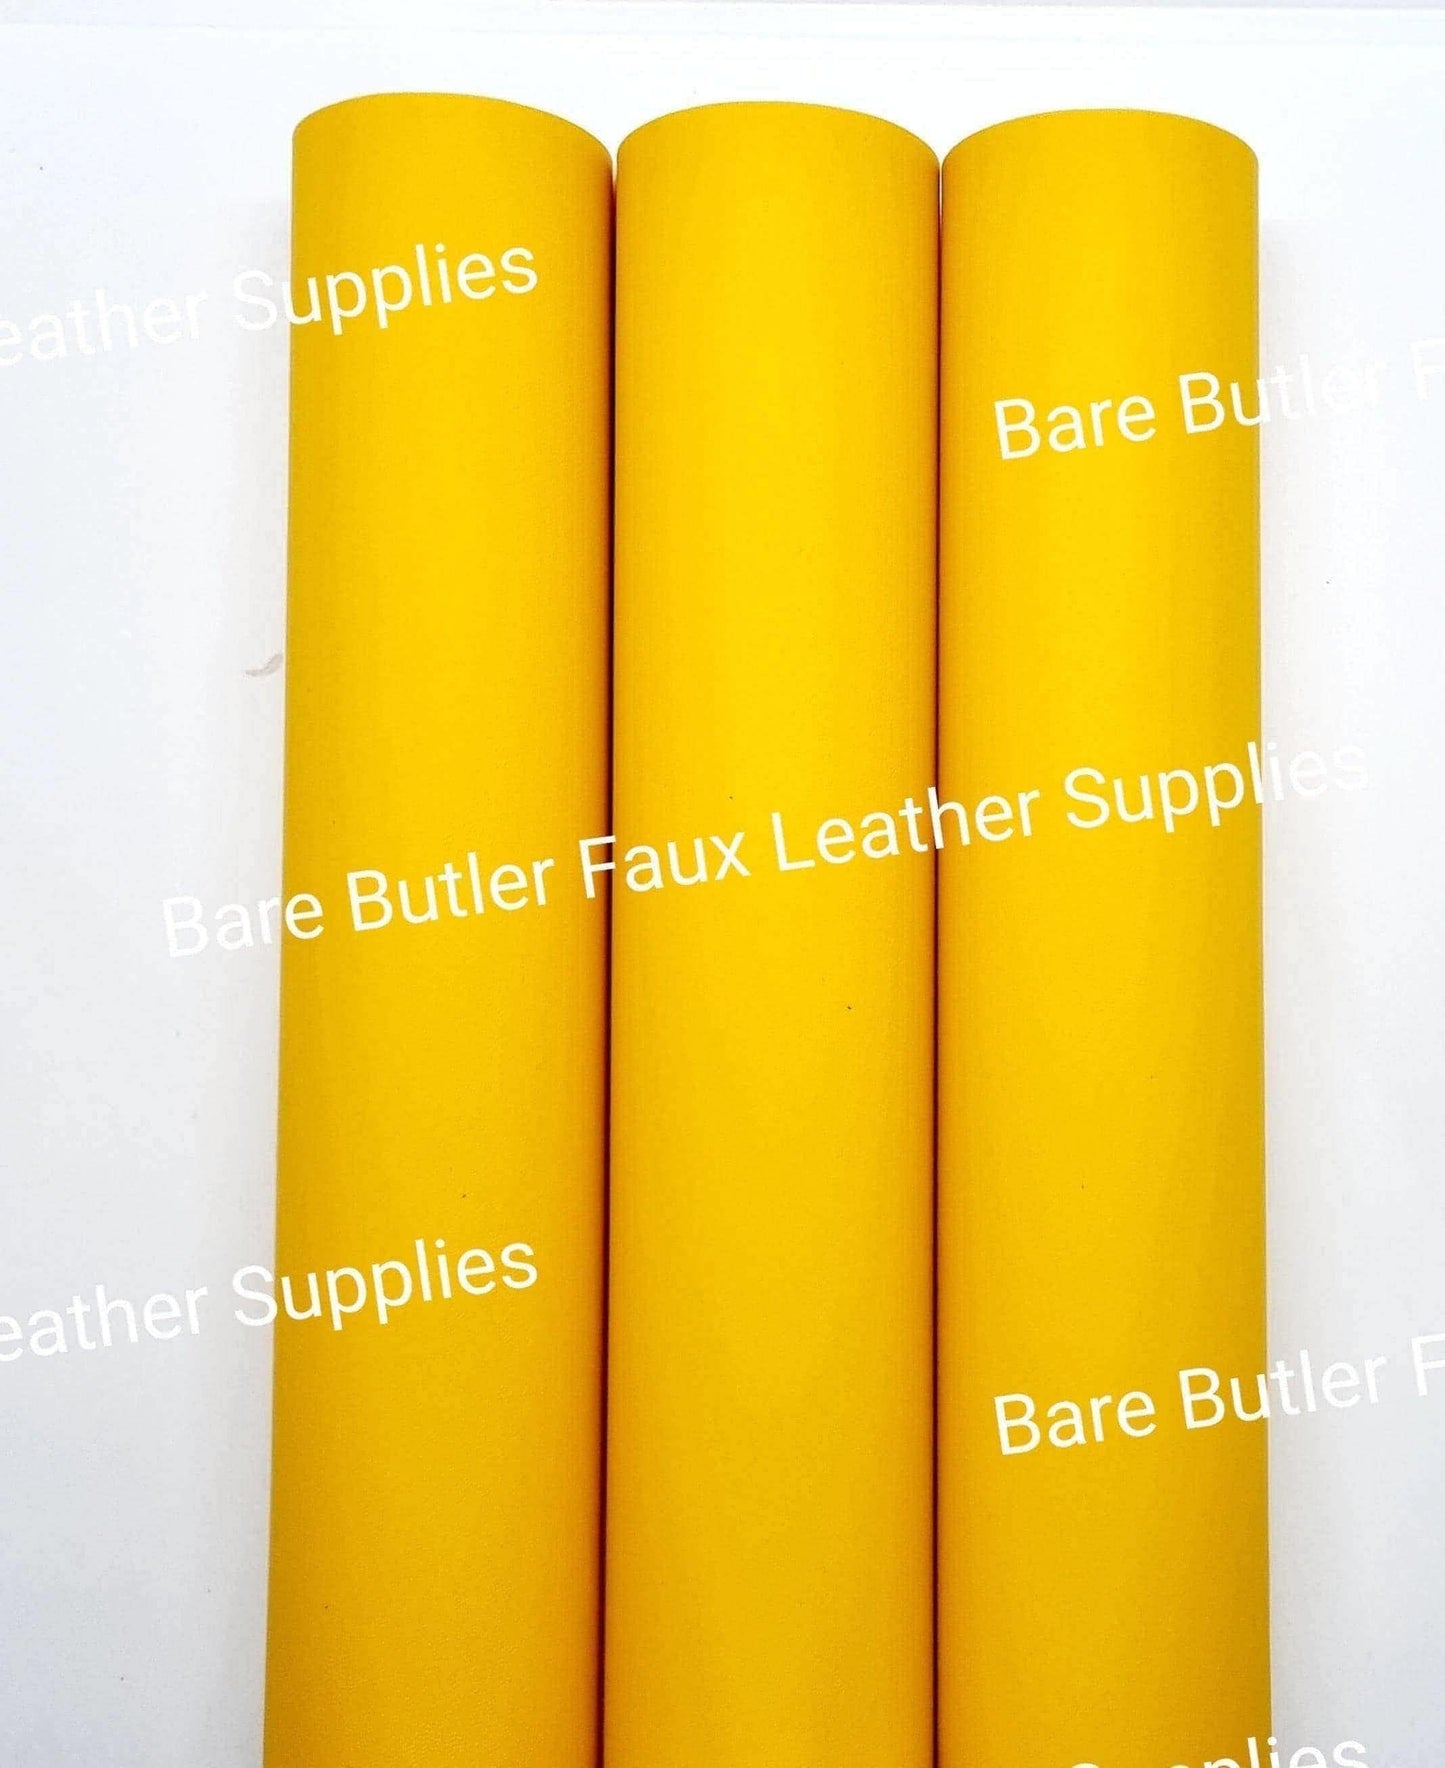 Solid Colour Litchi Roll - Mustard Yellow - Colour, Faux, Faux Leather, Leather, leatherette, Litchi, Solid, Yellow, yellowmustard - Bare Butler Faux Leather Supplies 